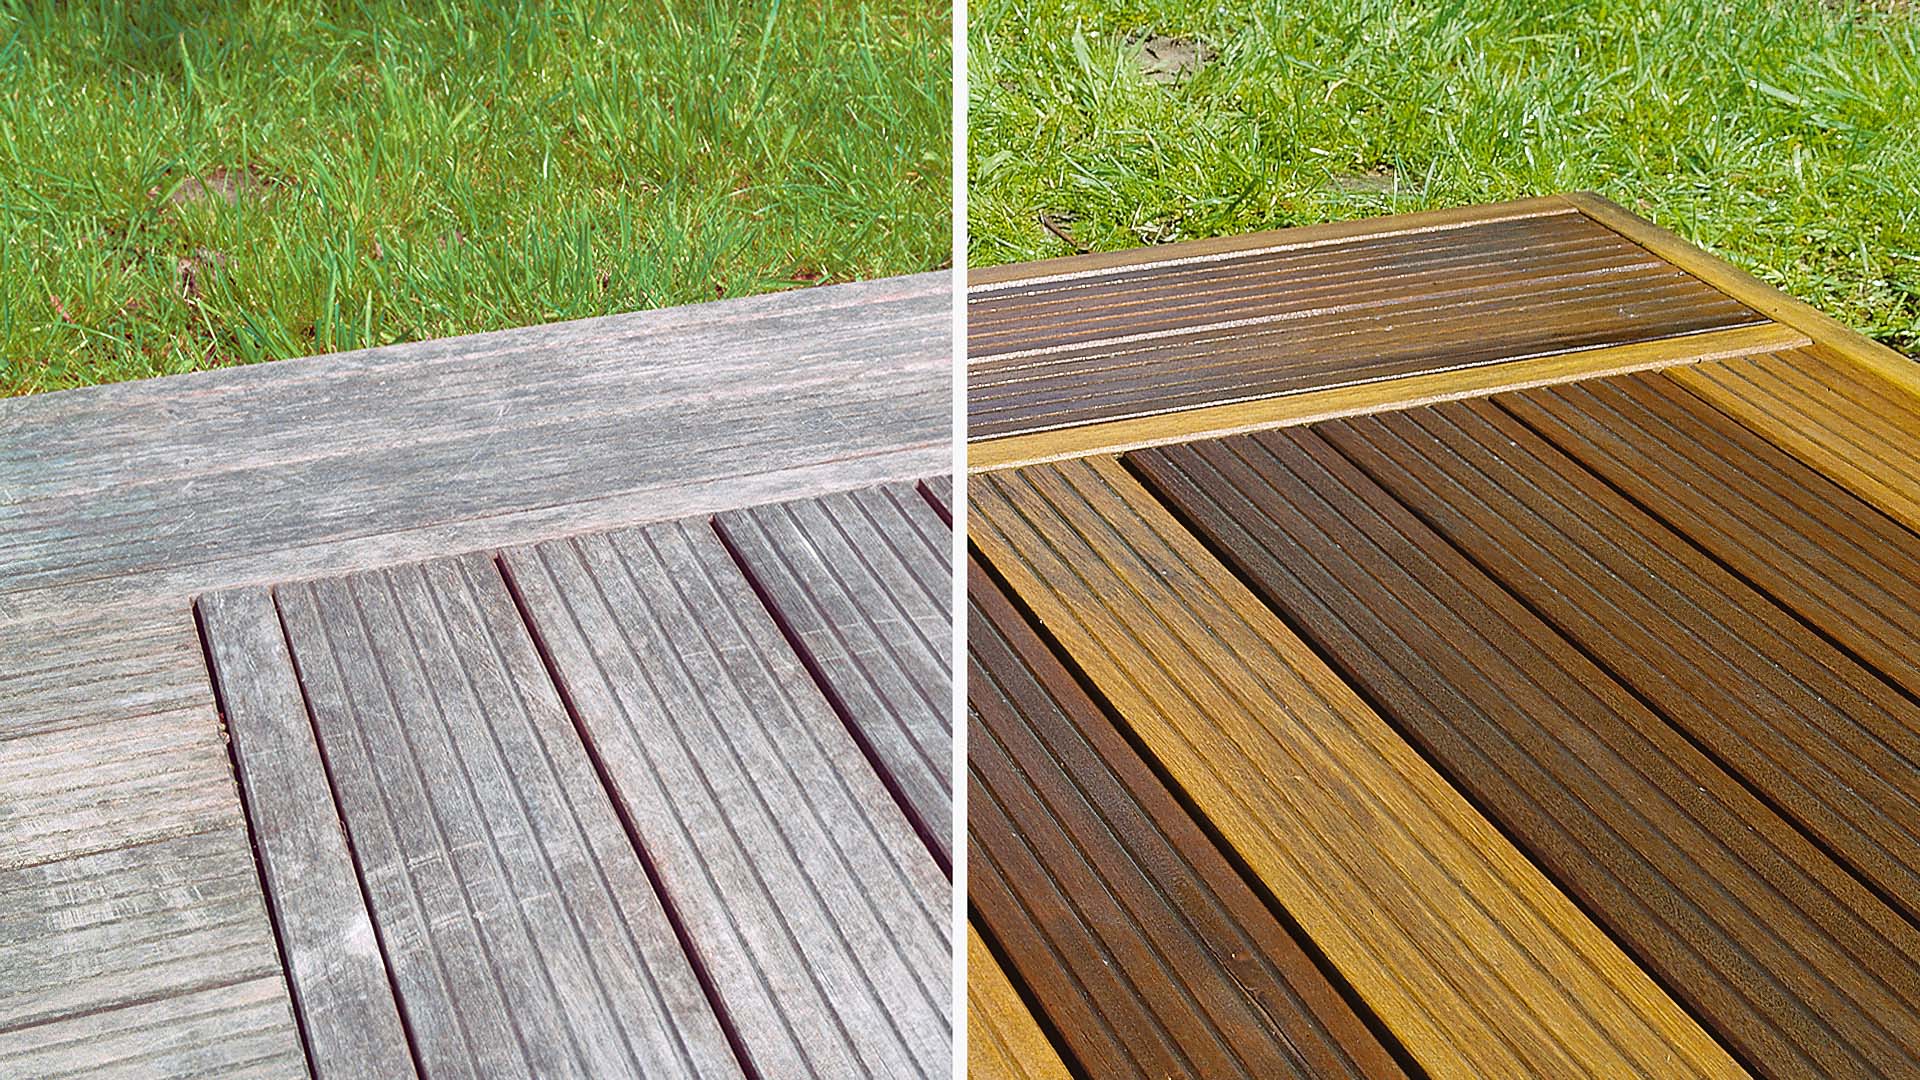 Wood Deck Cleaner: How To Clean Decking with Osmo? - Osmo UK